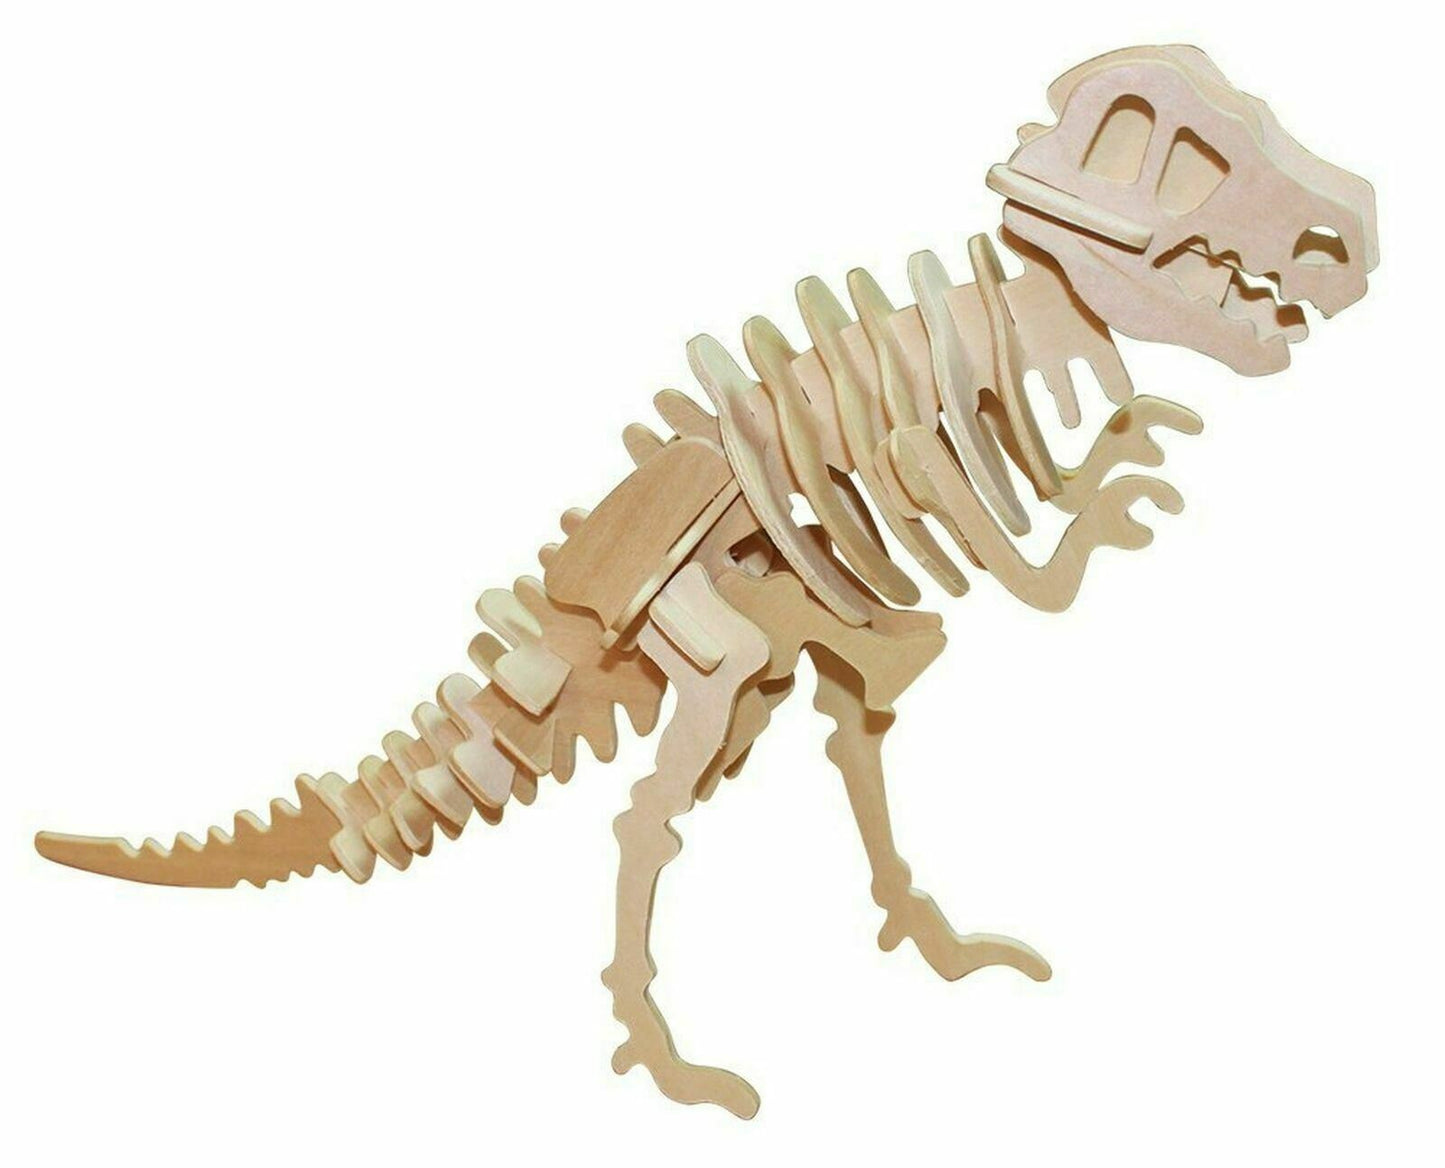 Science4you T-REX 3D Wooden Puzzle Educational Science Toy STEM Toy